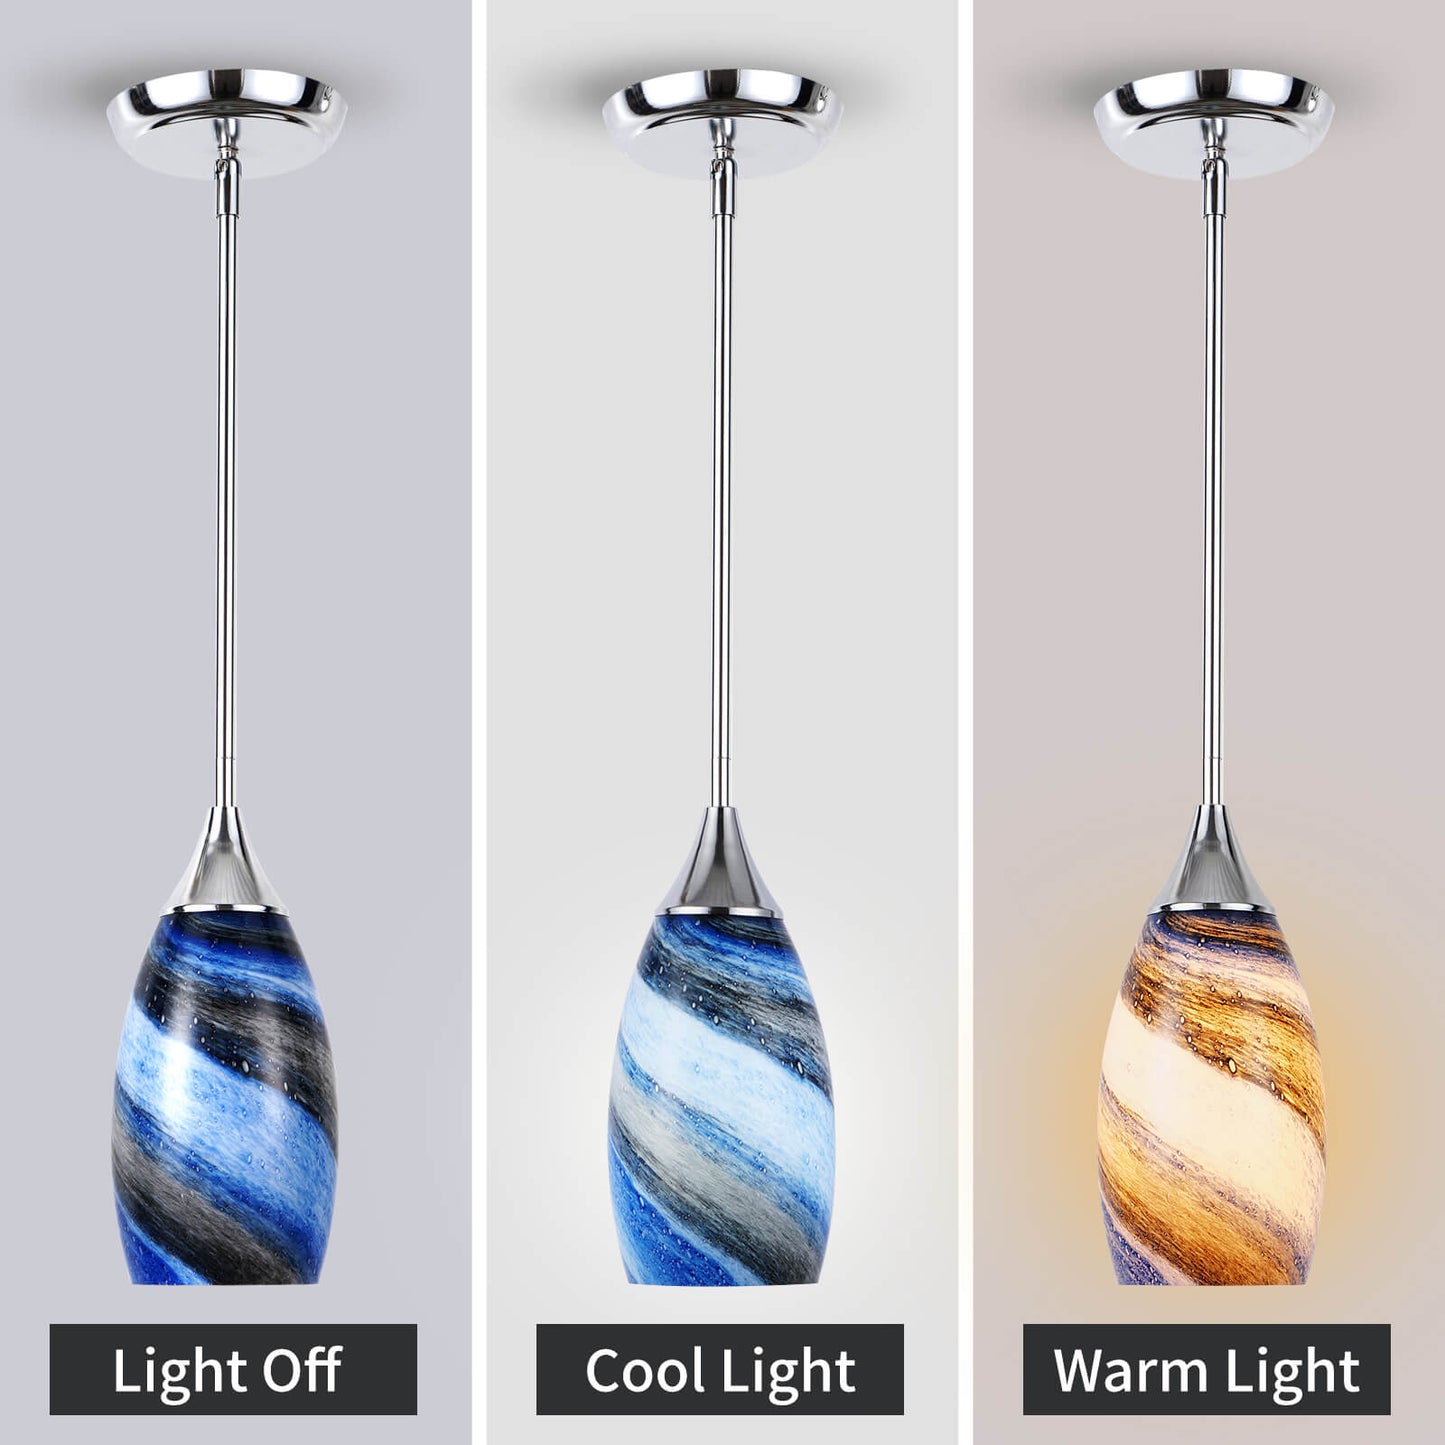 Porseme Pendant Light Features Kitchen Island Hanging Lamp with Plug-in Adjustable Rod Handcraft Art Glass Shade E26 Socket for Home Kitchen Sink Counter Make-up Table